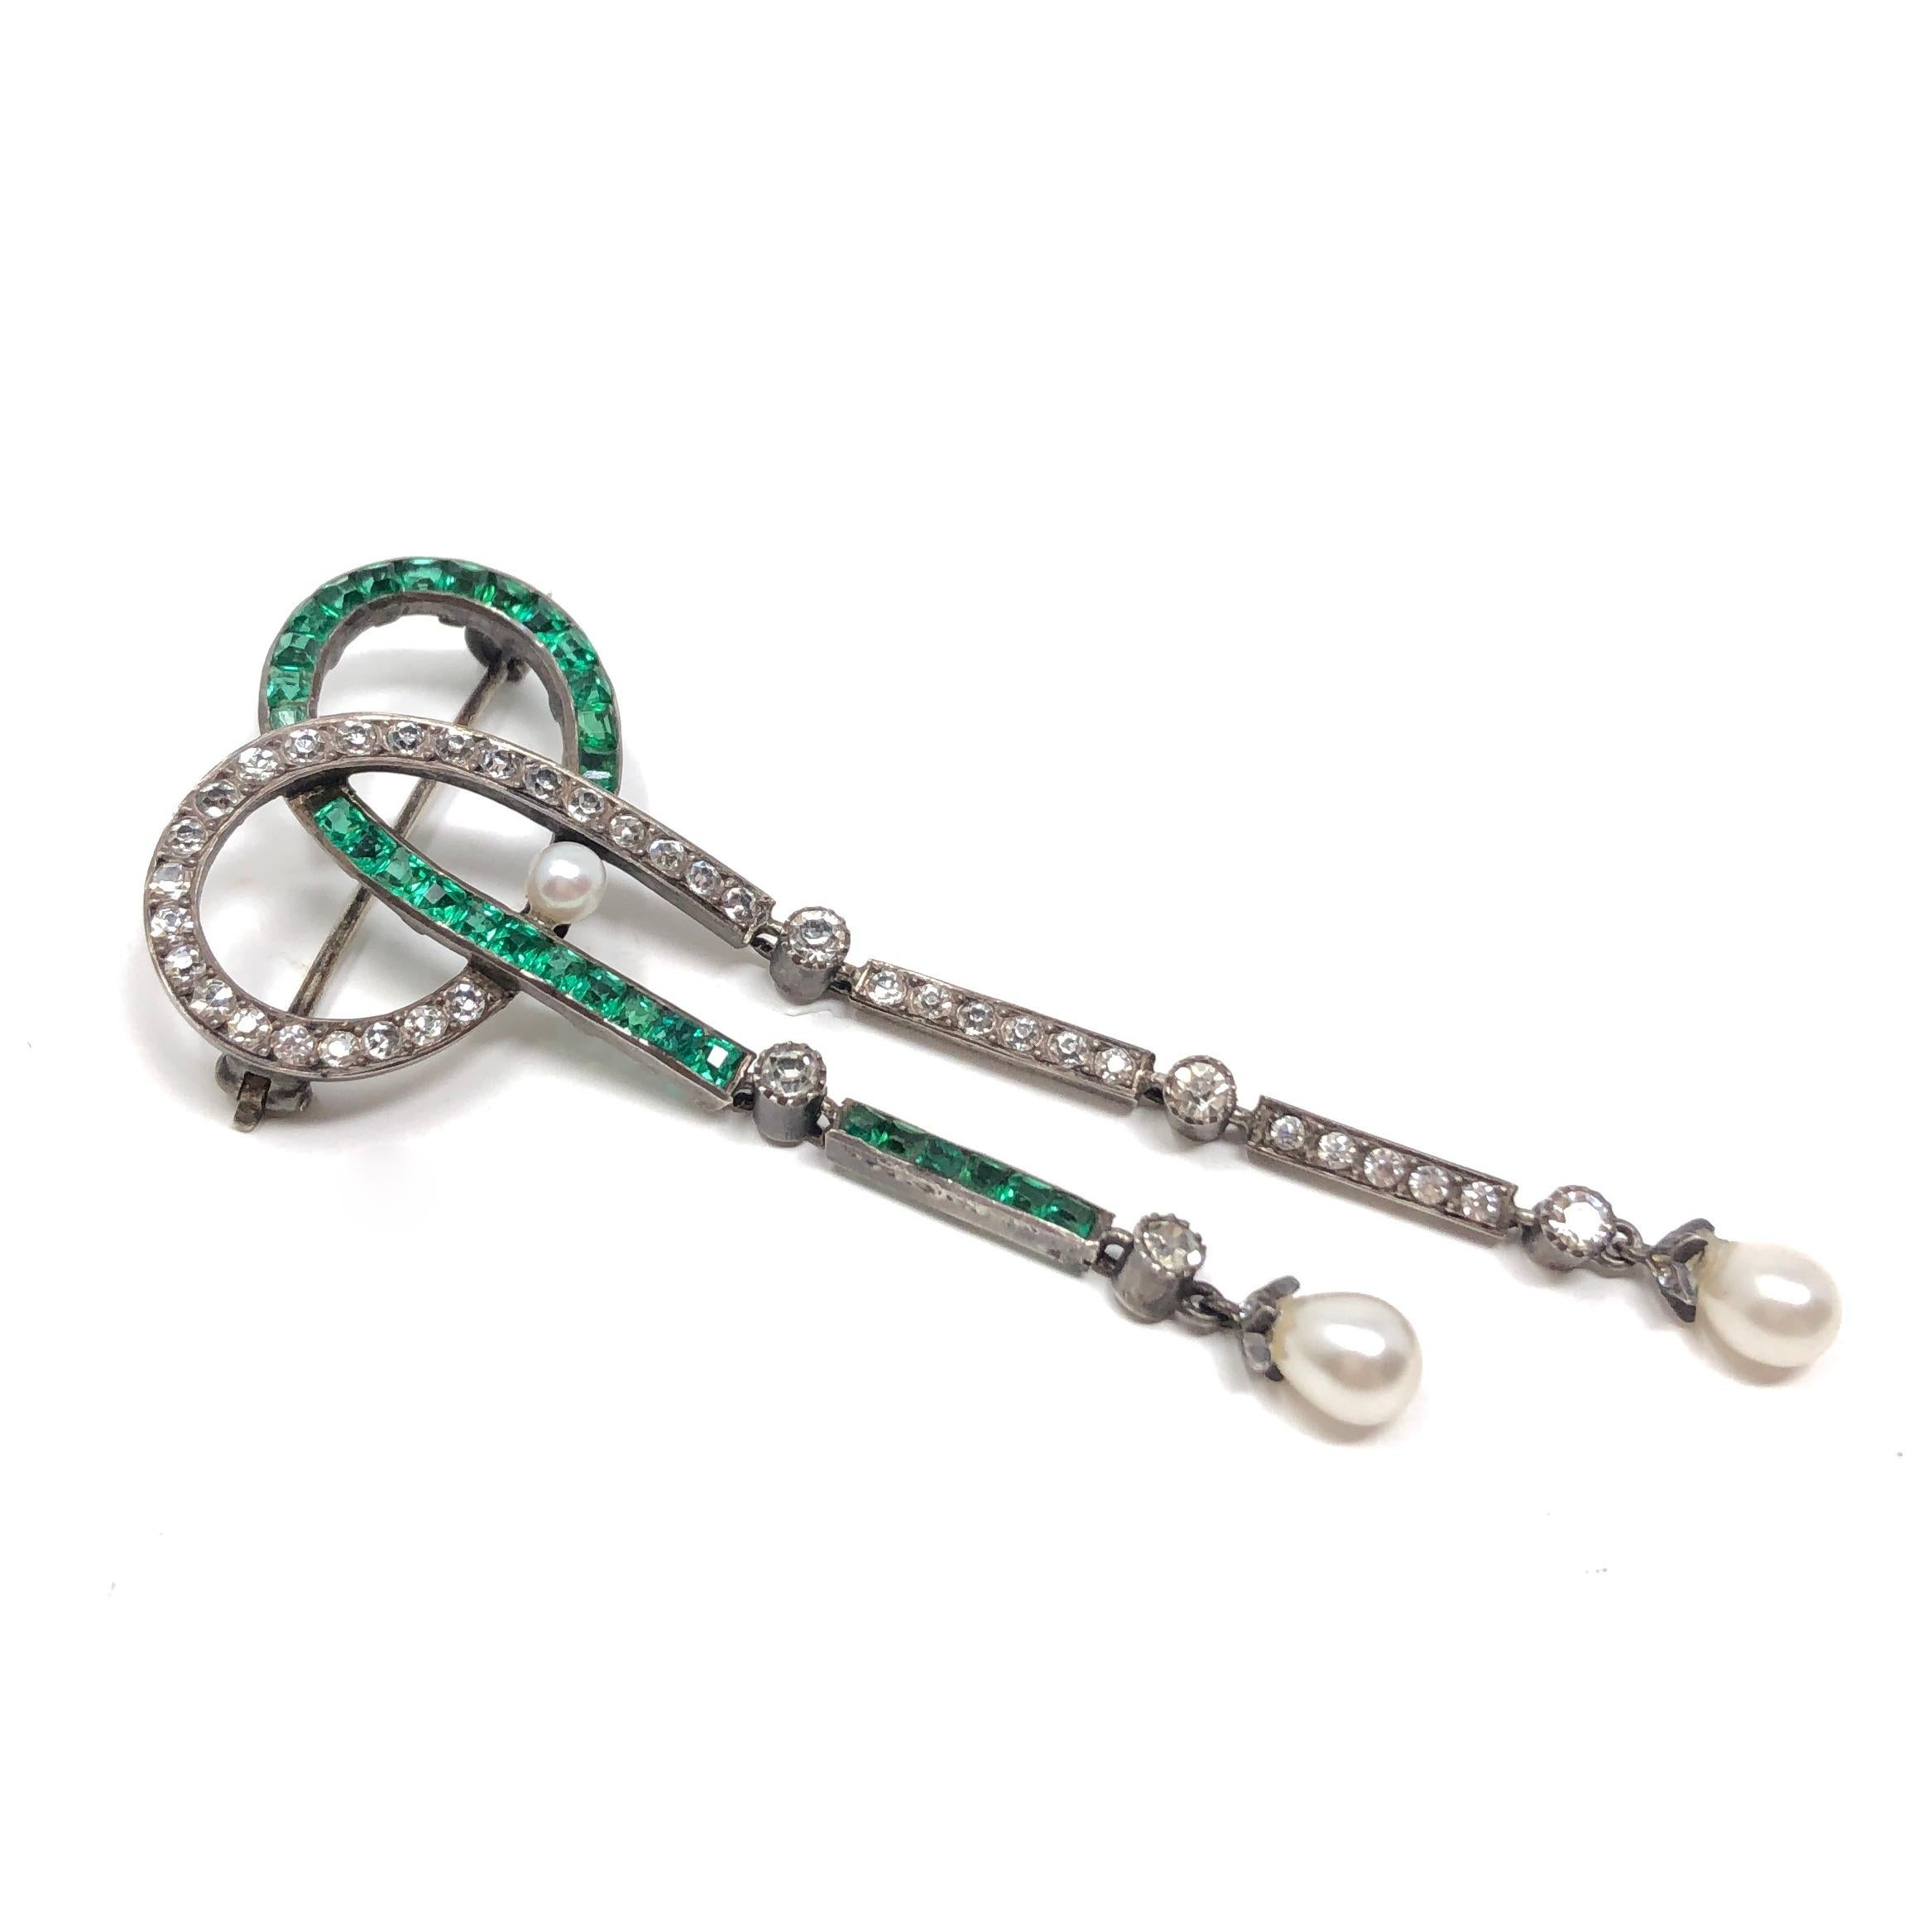 Edwardian c.1900 Emerald Paste and Faux Pearl Antique Négligée Brooch 1